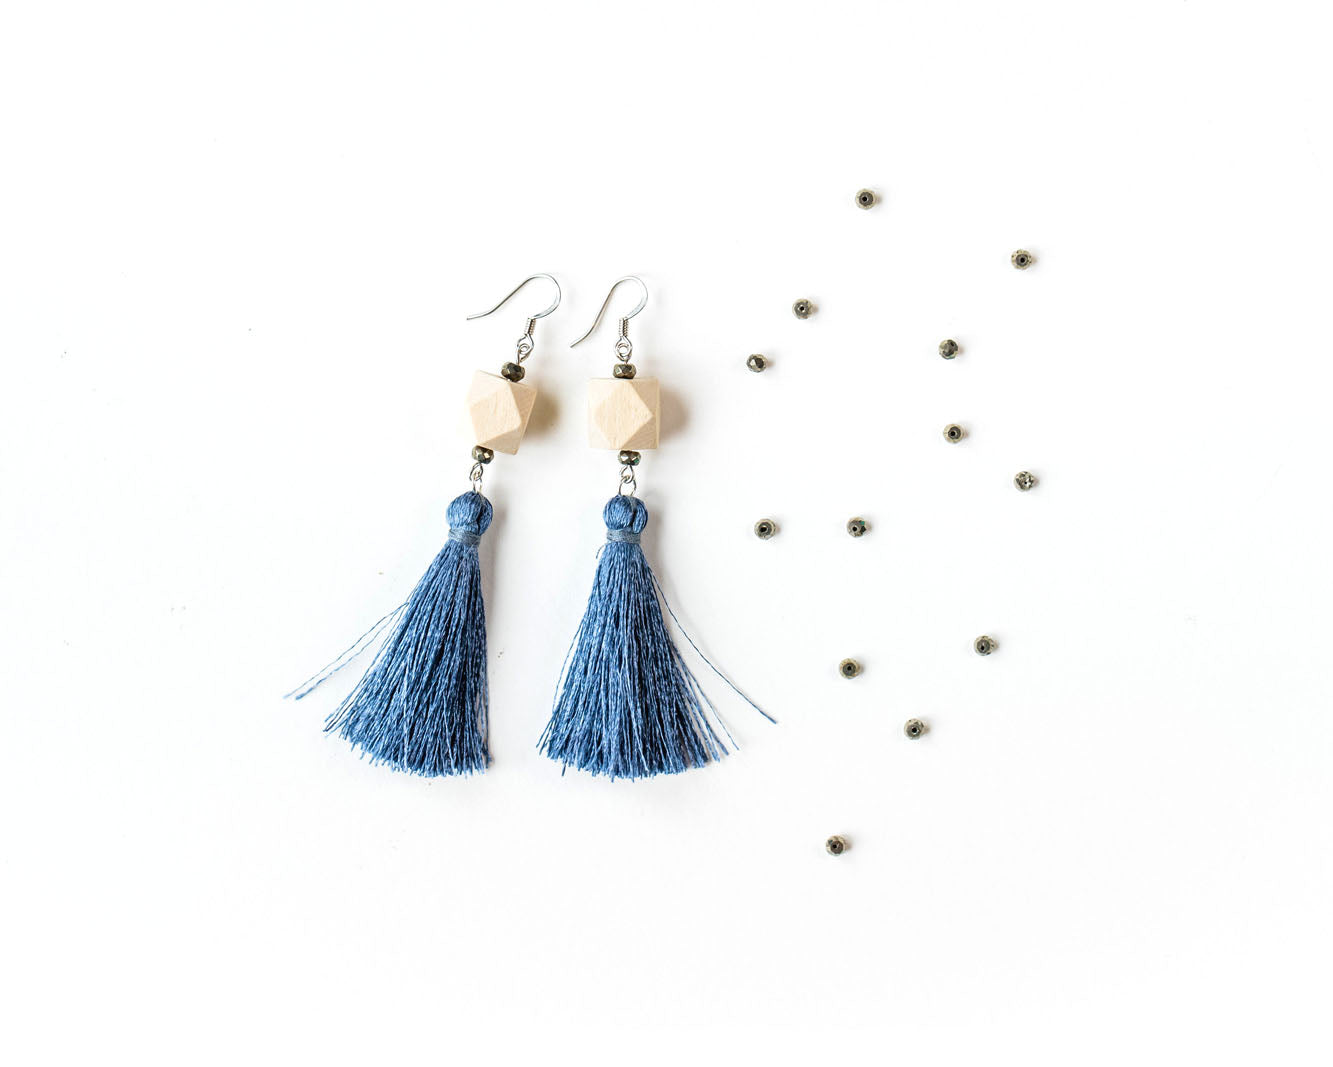 Pyrite Tassel Earrings with Nickel-Free Surgical Steel Silver - Tittup Unique Aromatherapy & Jewellery